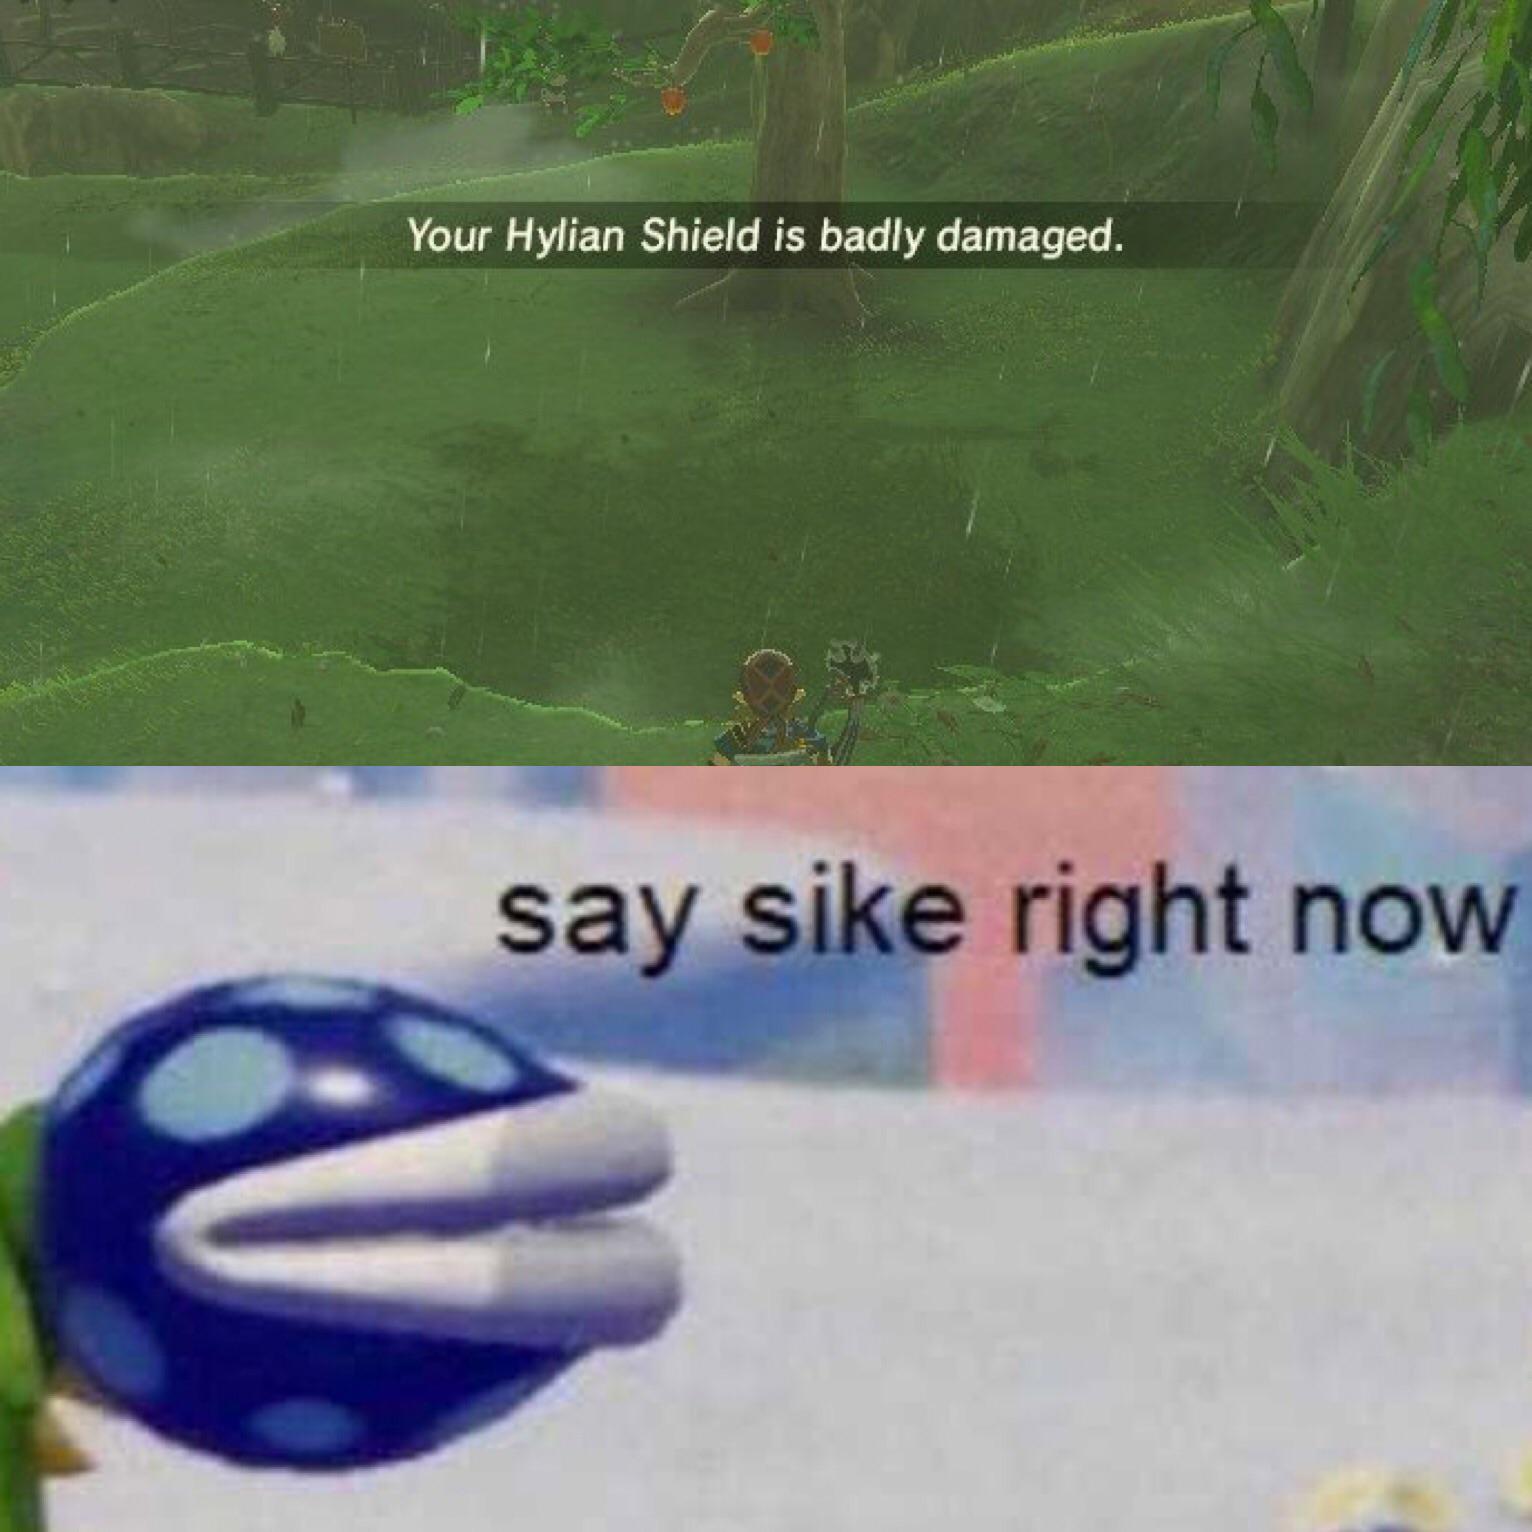 zelda meme - say sike right now memes - Your Hylian Shield is badly damaged. say sike right now